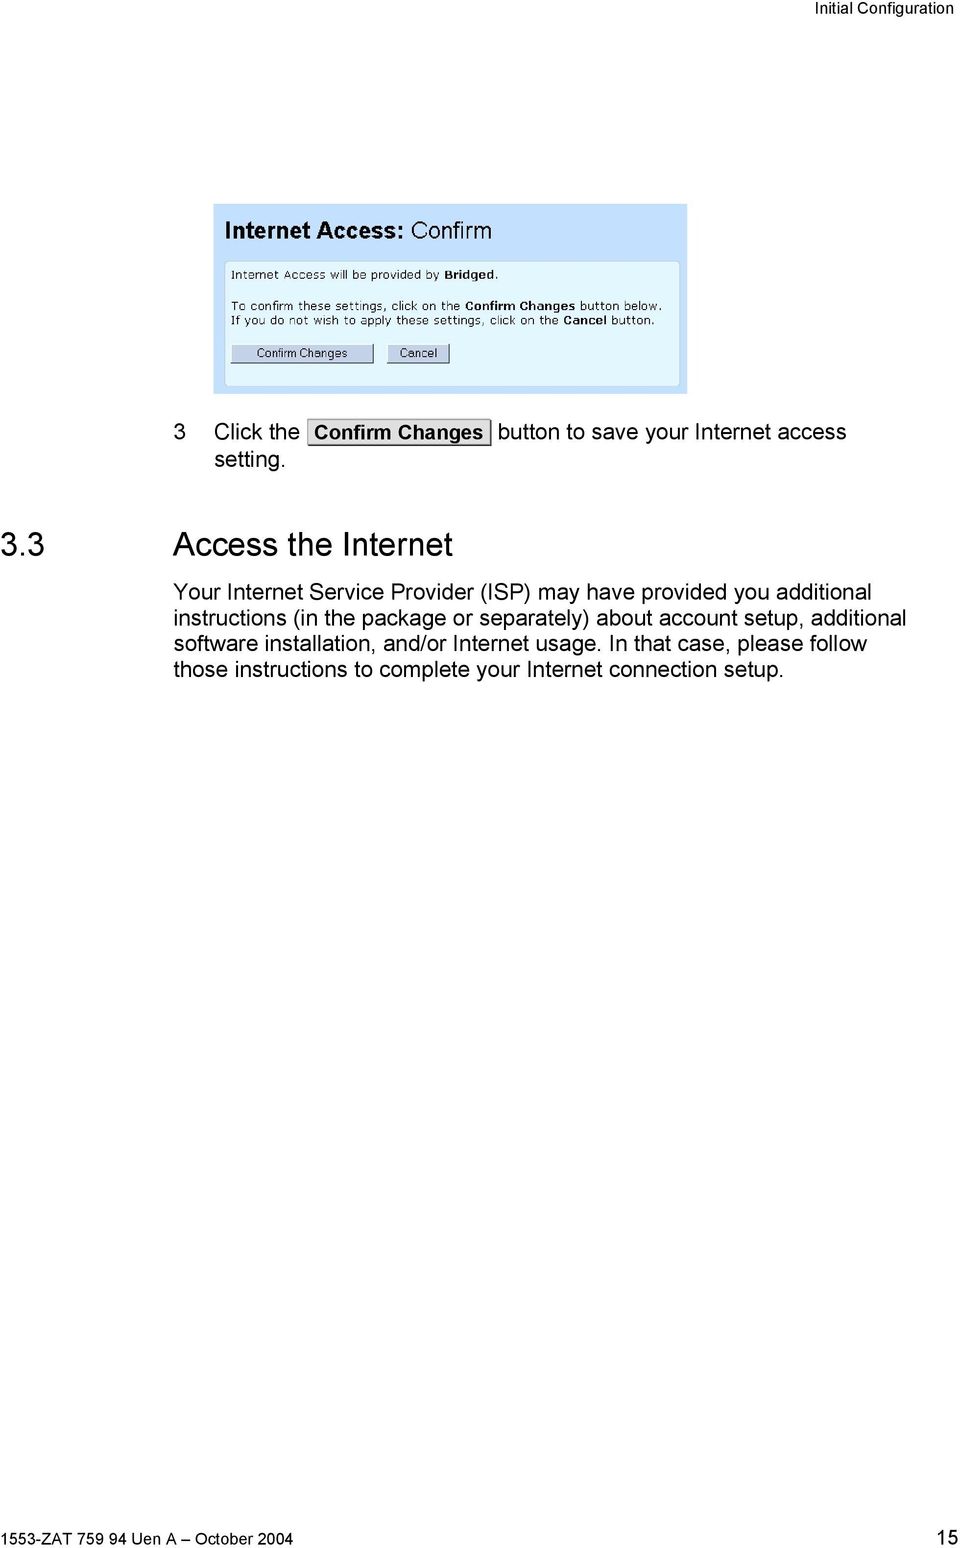 3 Access the Internet Your Internet Service Provider (ISP) may have provided you additional instructions (in